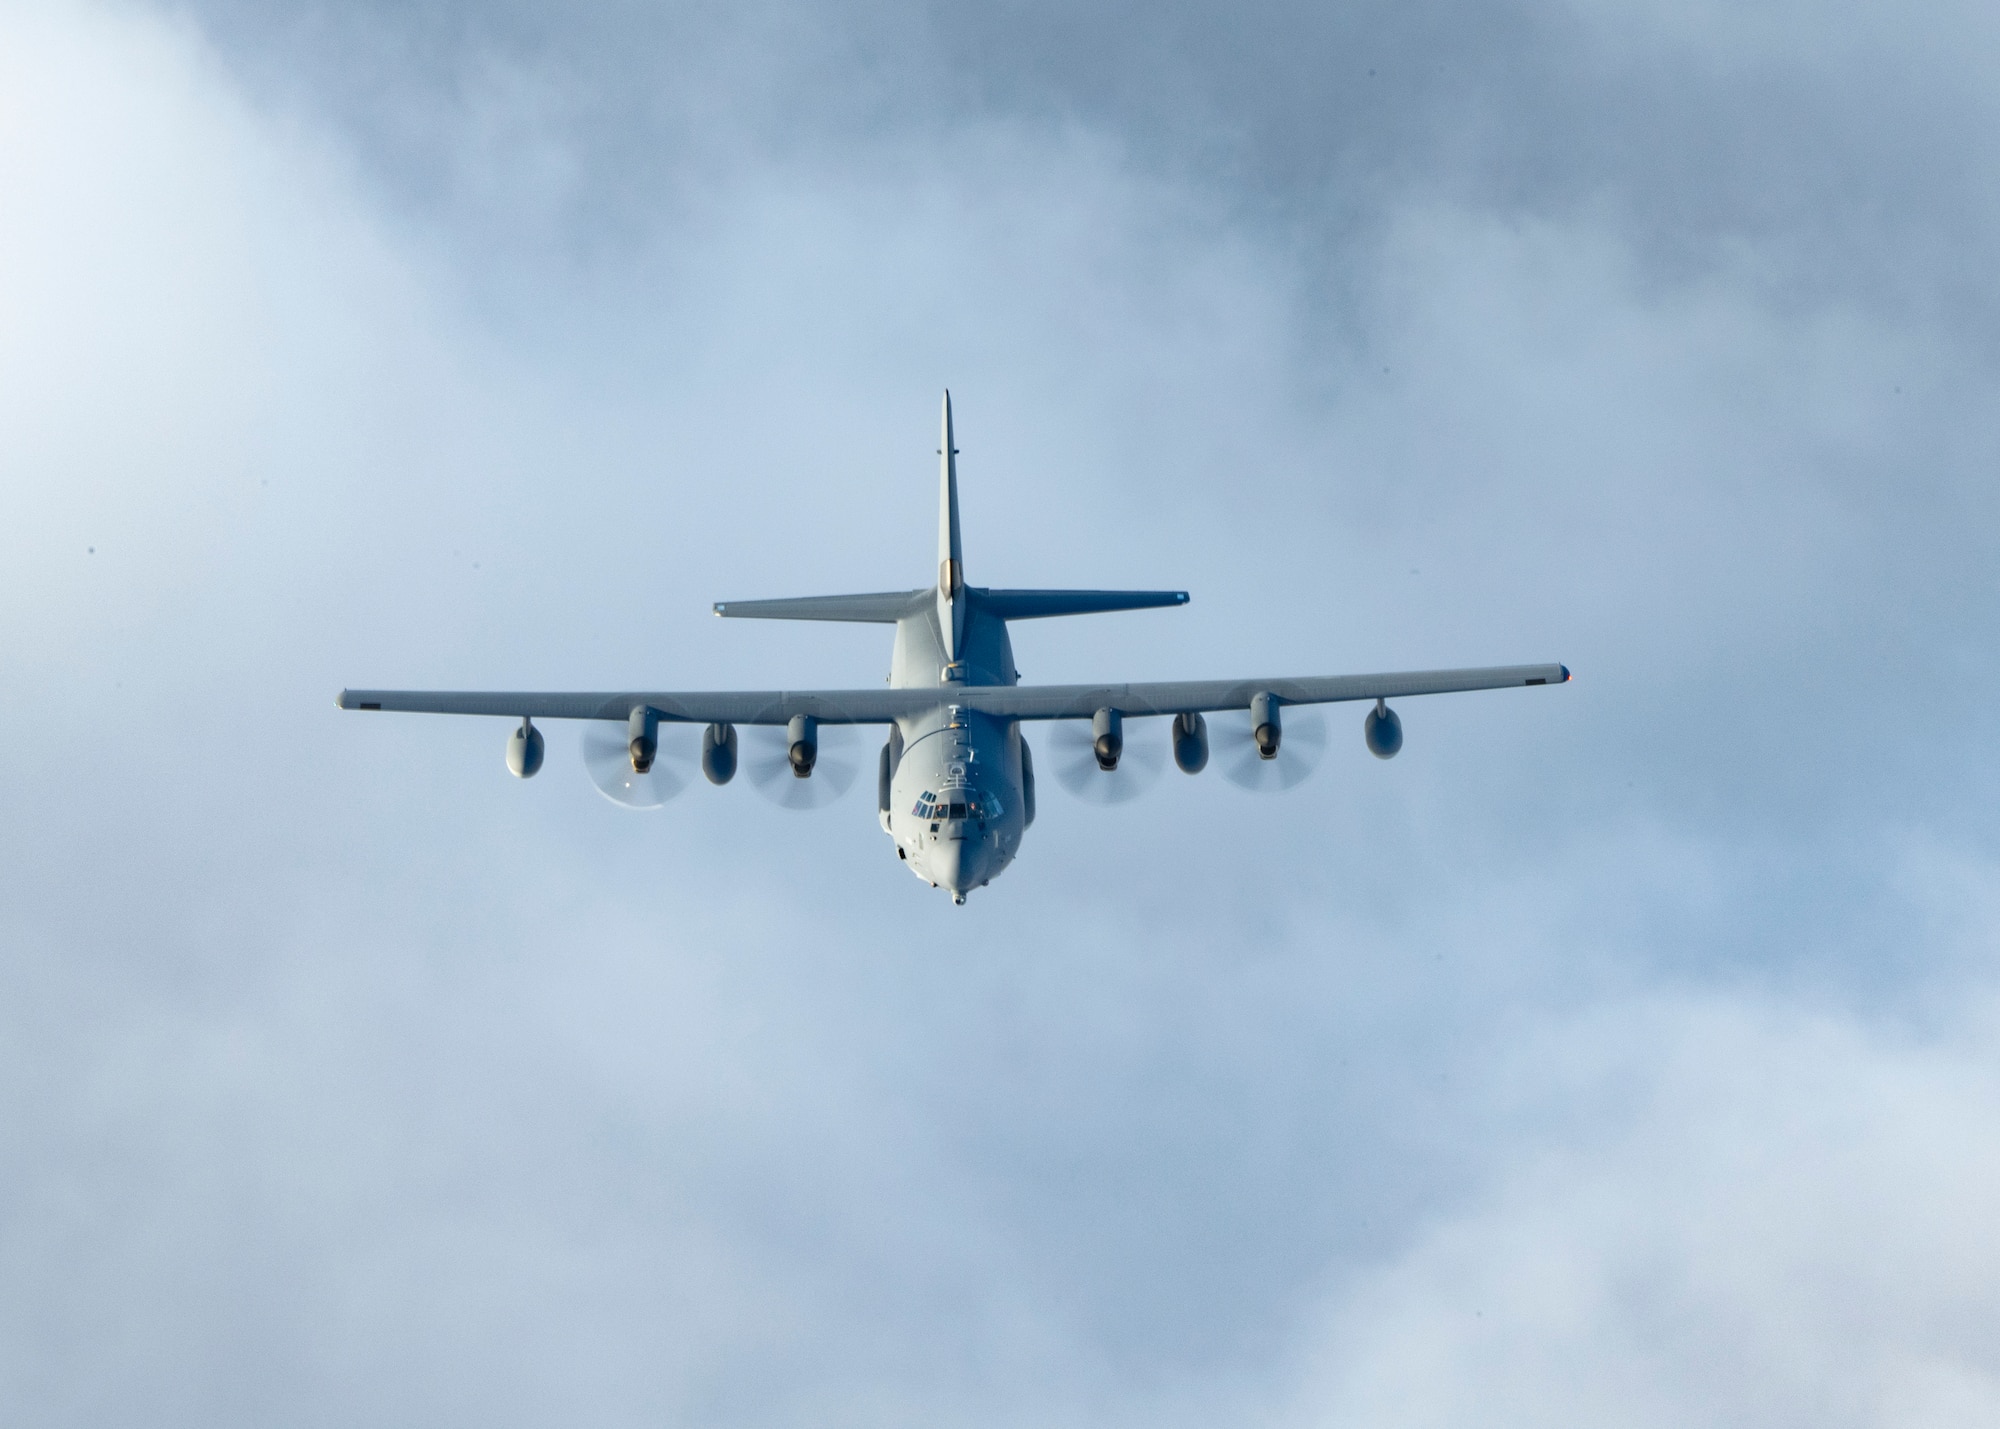 An MC-130J Commando II, assigned to the 352nd Special Operations Wing, flies over Sweden on Nov. 13, 2020. U.S. and Swedish armed forces conduct qualified exercises together to strengthen defense capabilities across land, air and sea domains to deter any opponent. (U.S. Air Force photo by Master Sgt. Roidan Carlson)